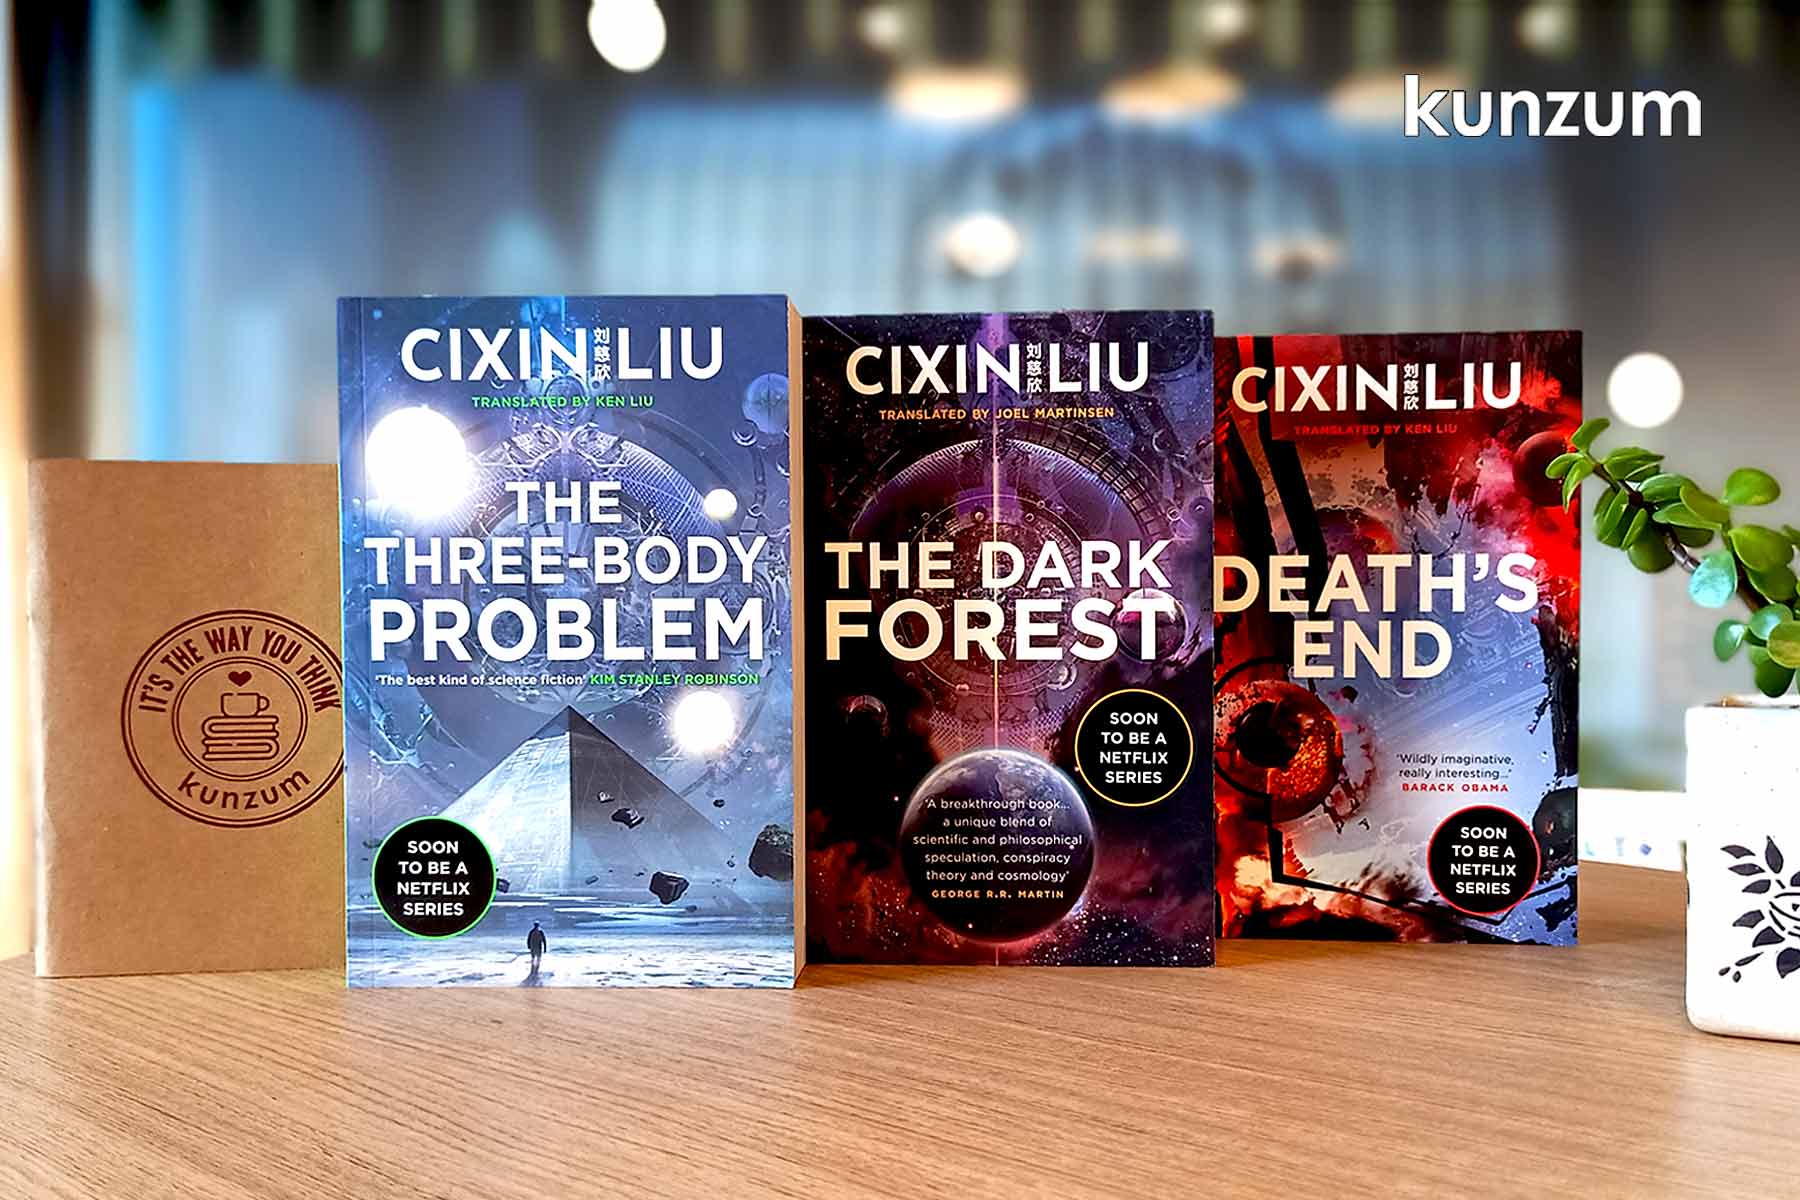 Humanity Encounters Extraterrestrial Existence in Cixin Liu’s “The Three-Body Problem Trilogy”